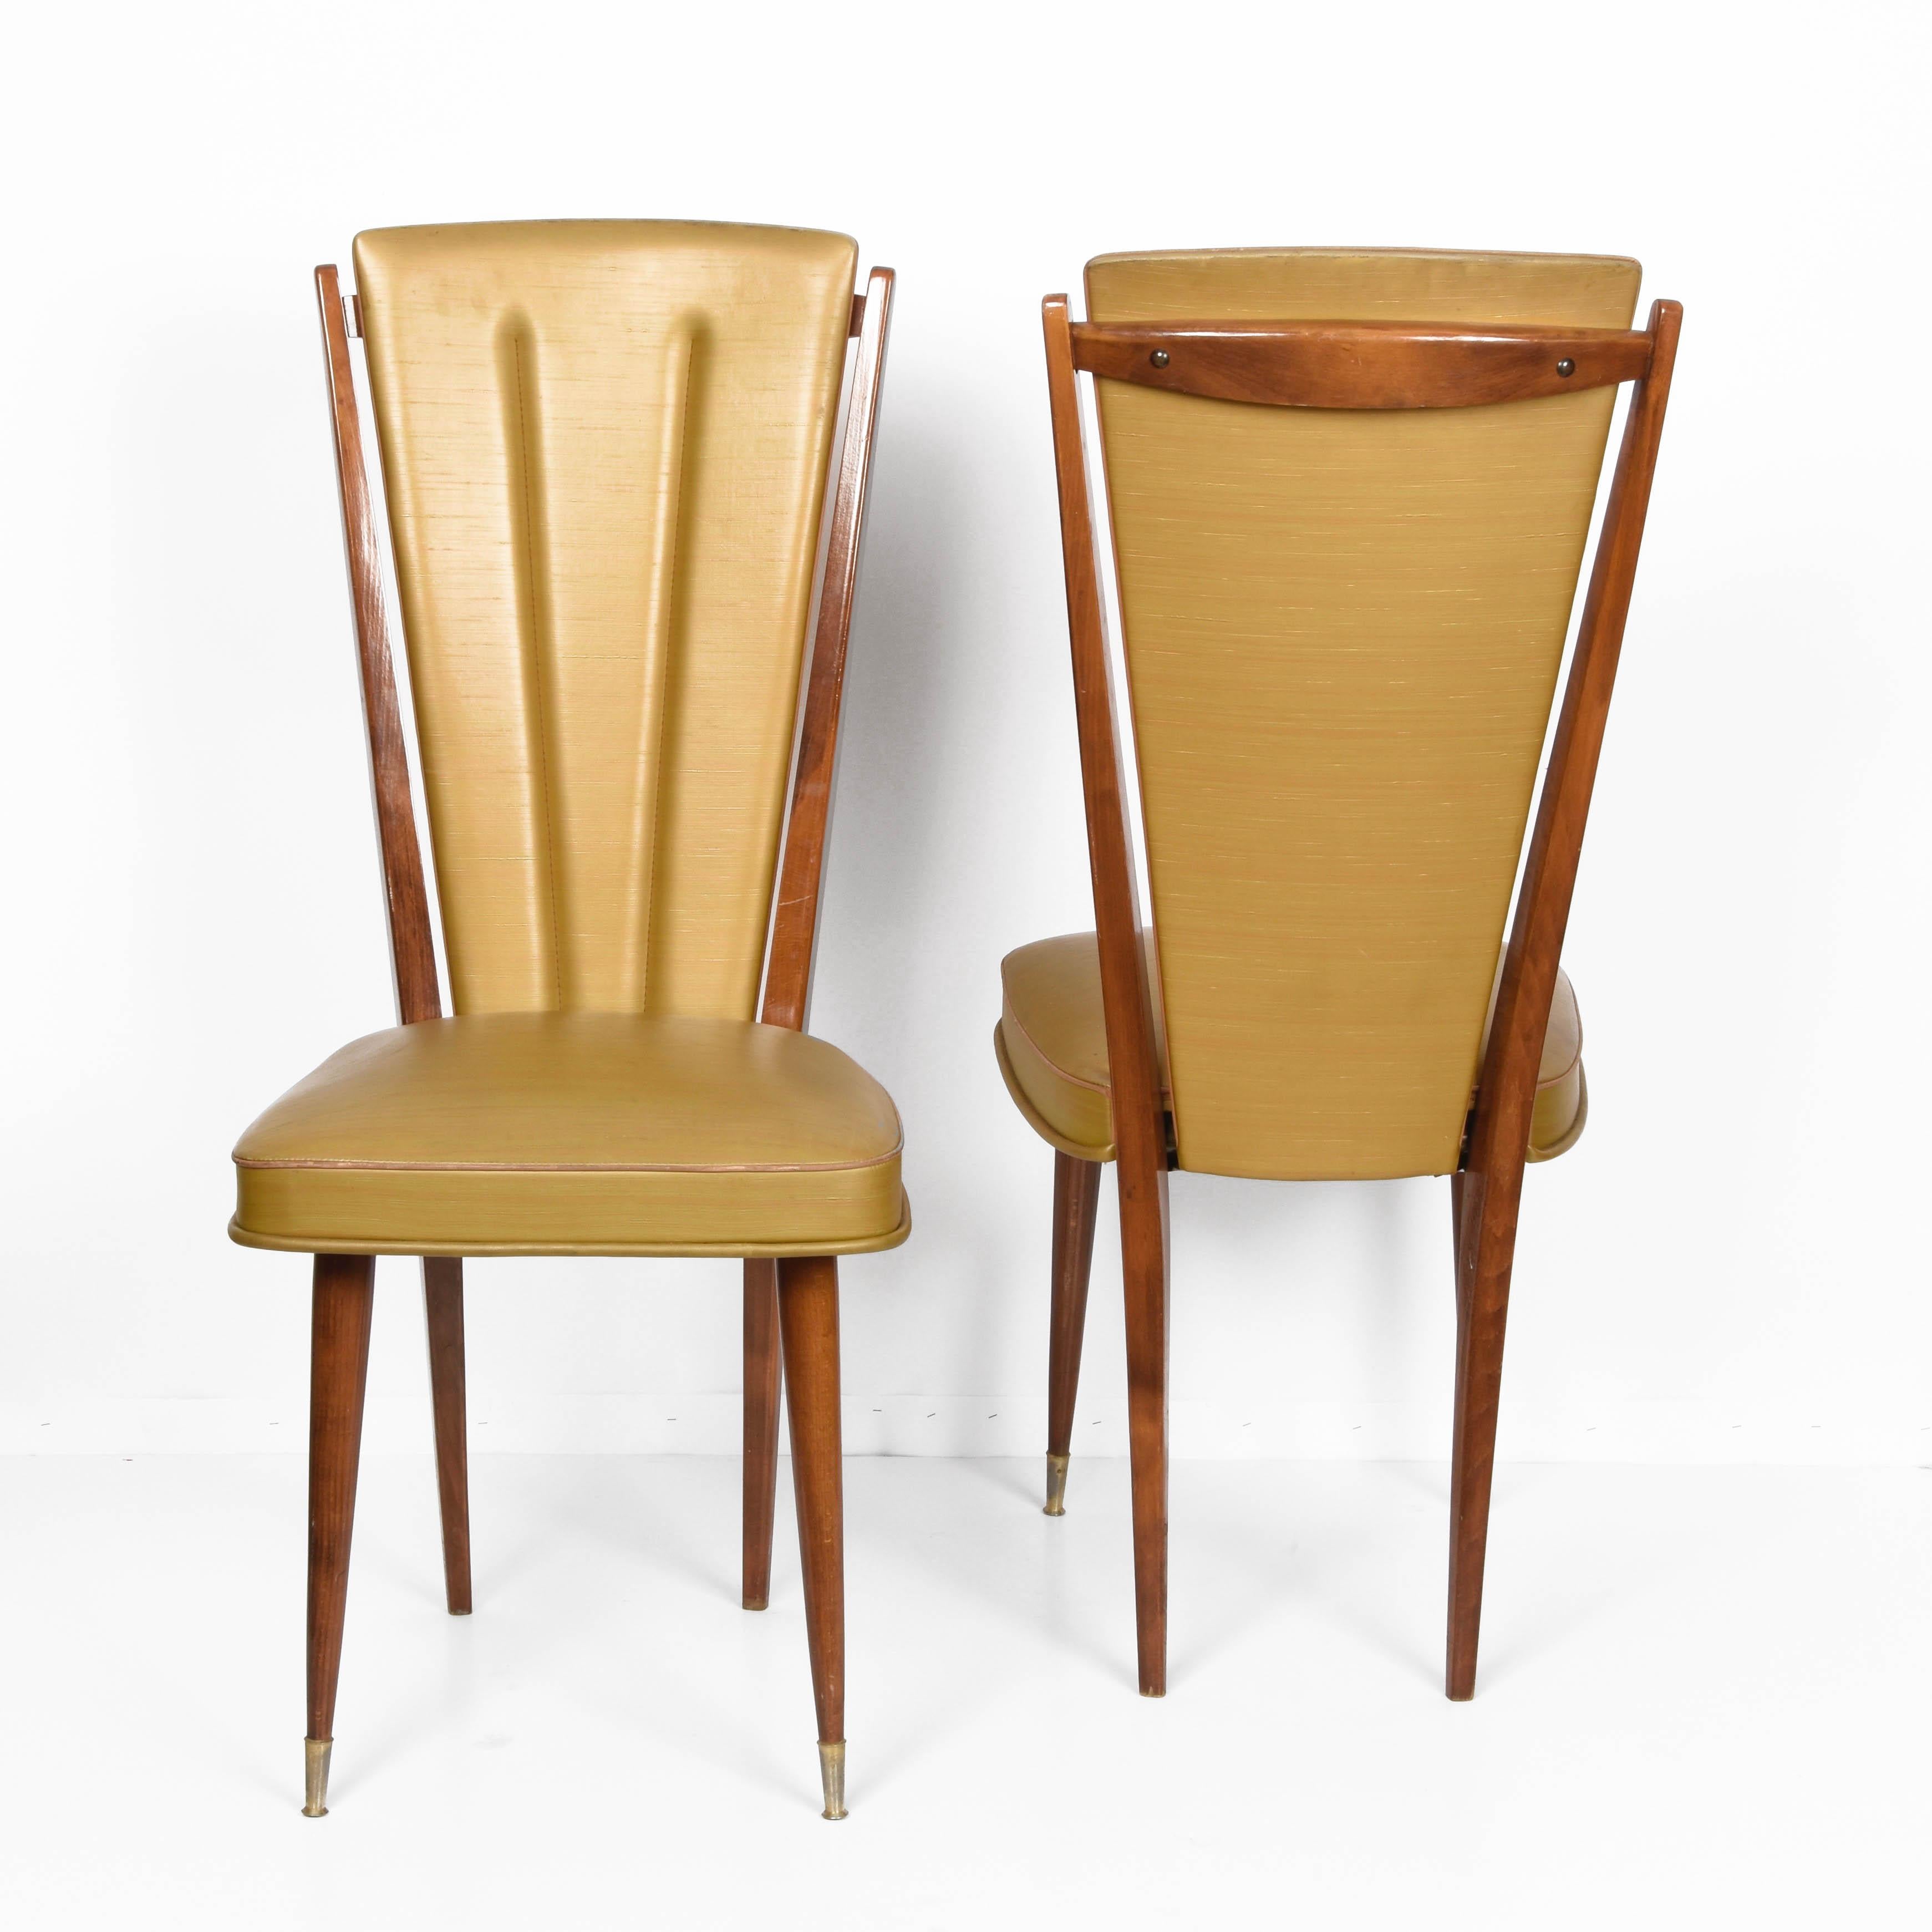 Amazing pair of beech and beige vinyl upholstered dining chairs. These items were produced in France during 1950s by Ameublement NF siege 24.

This set is a major example of French midcentury because of their lines both of the beech structure and